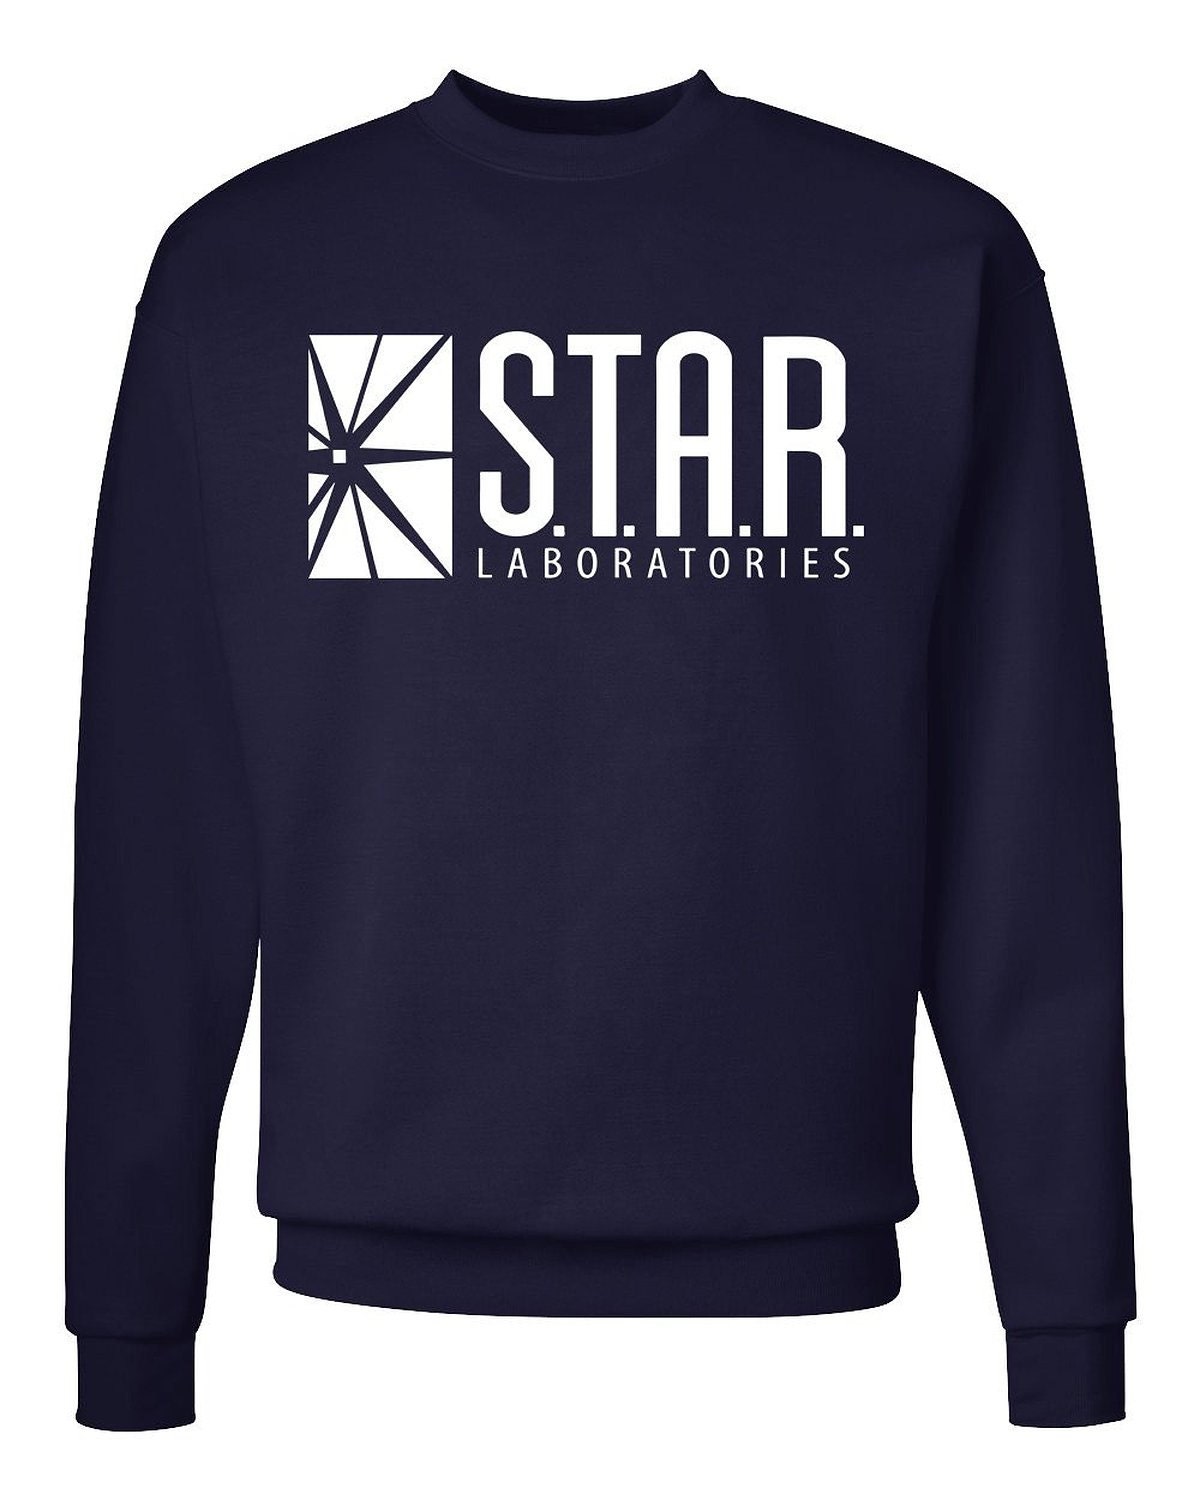 S.T.A.R Laboratories STAR Labs Sweater by DealsandThrills on Etsy